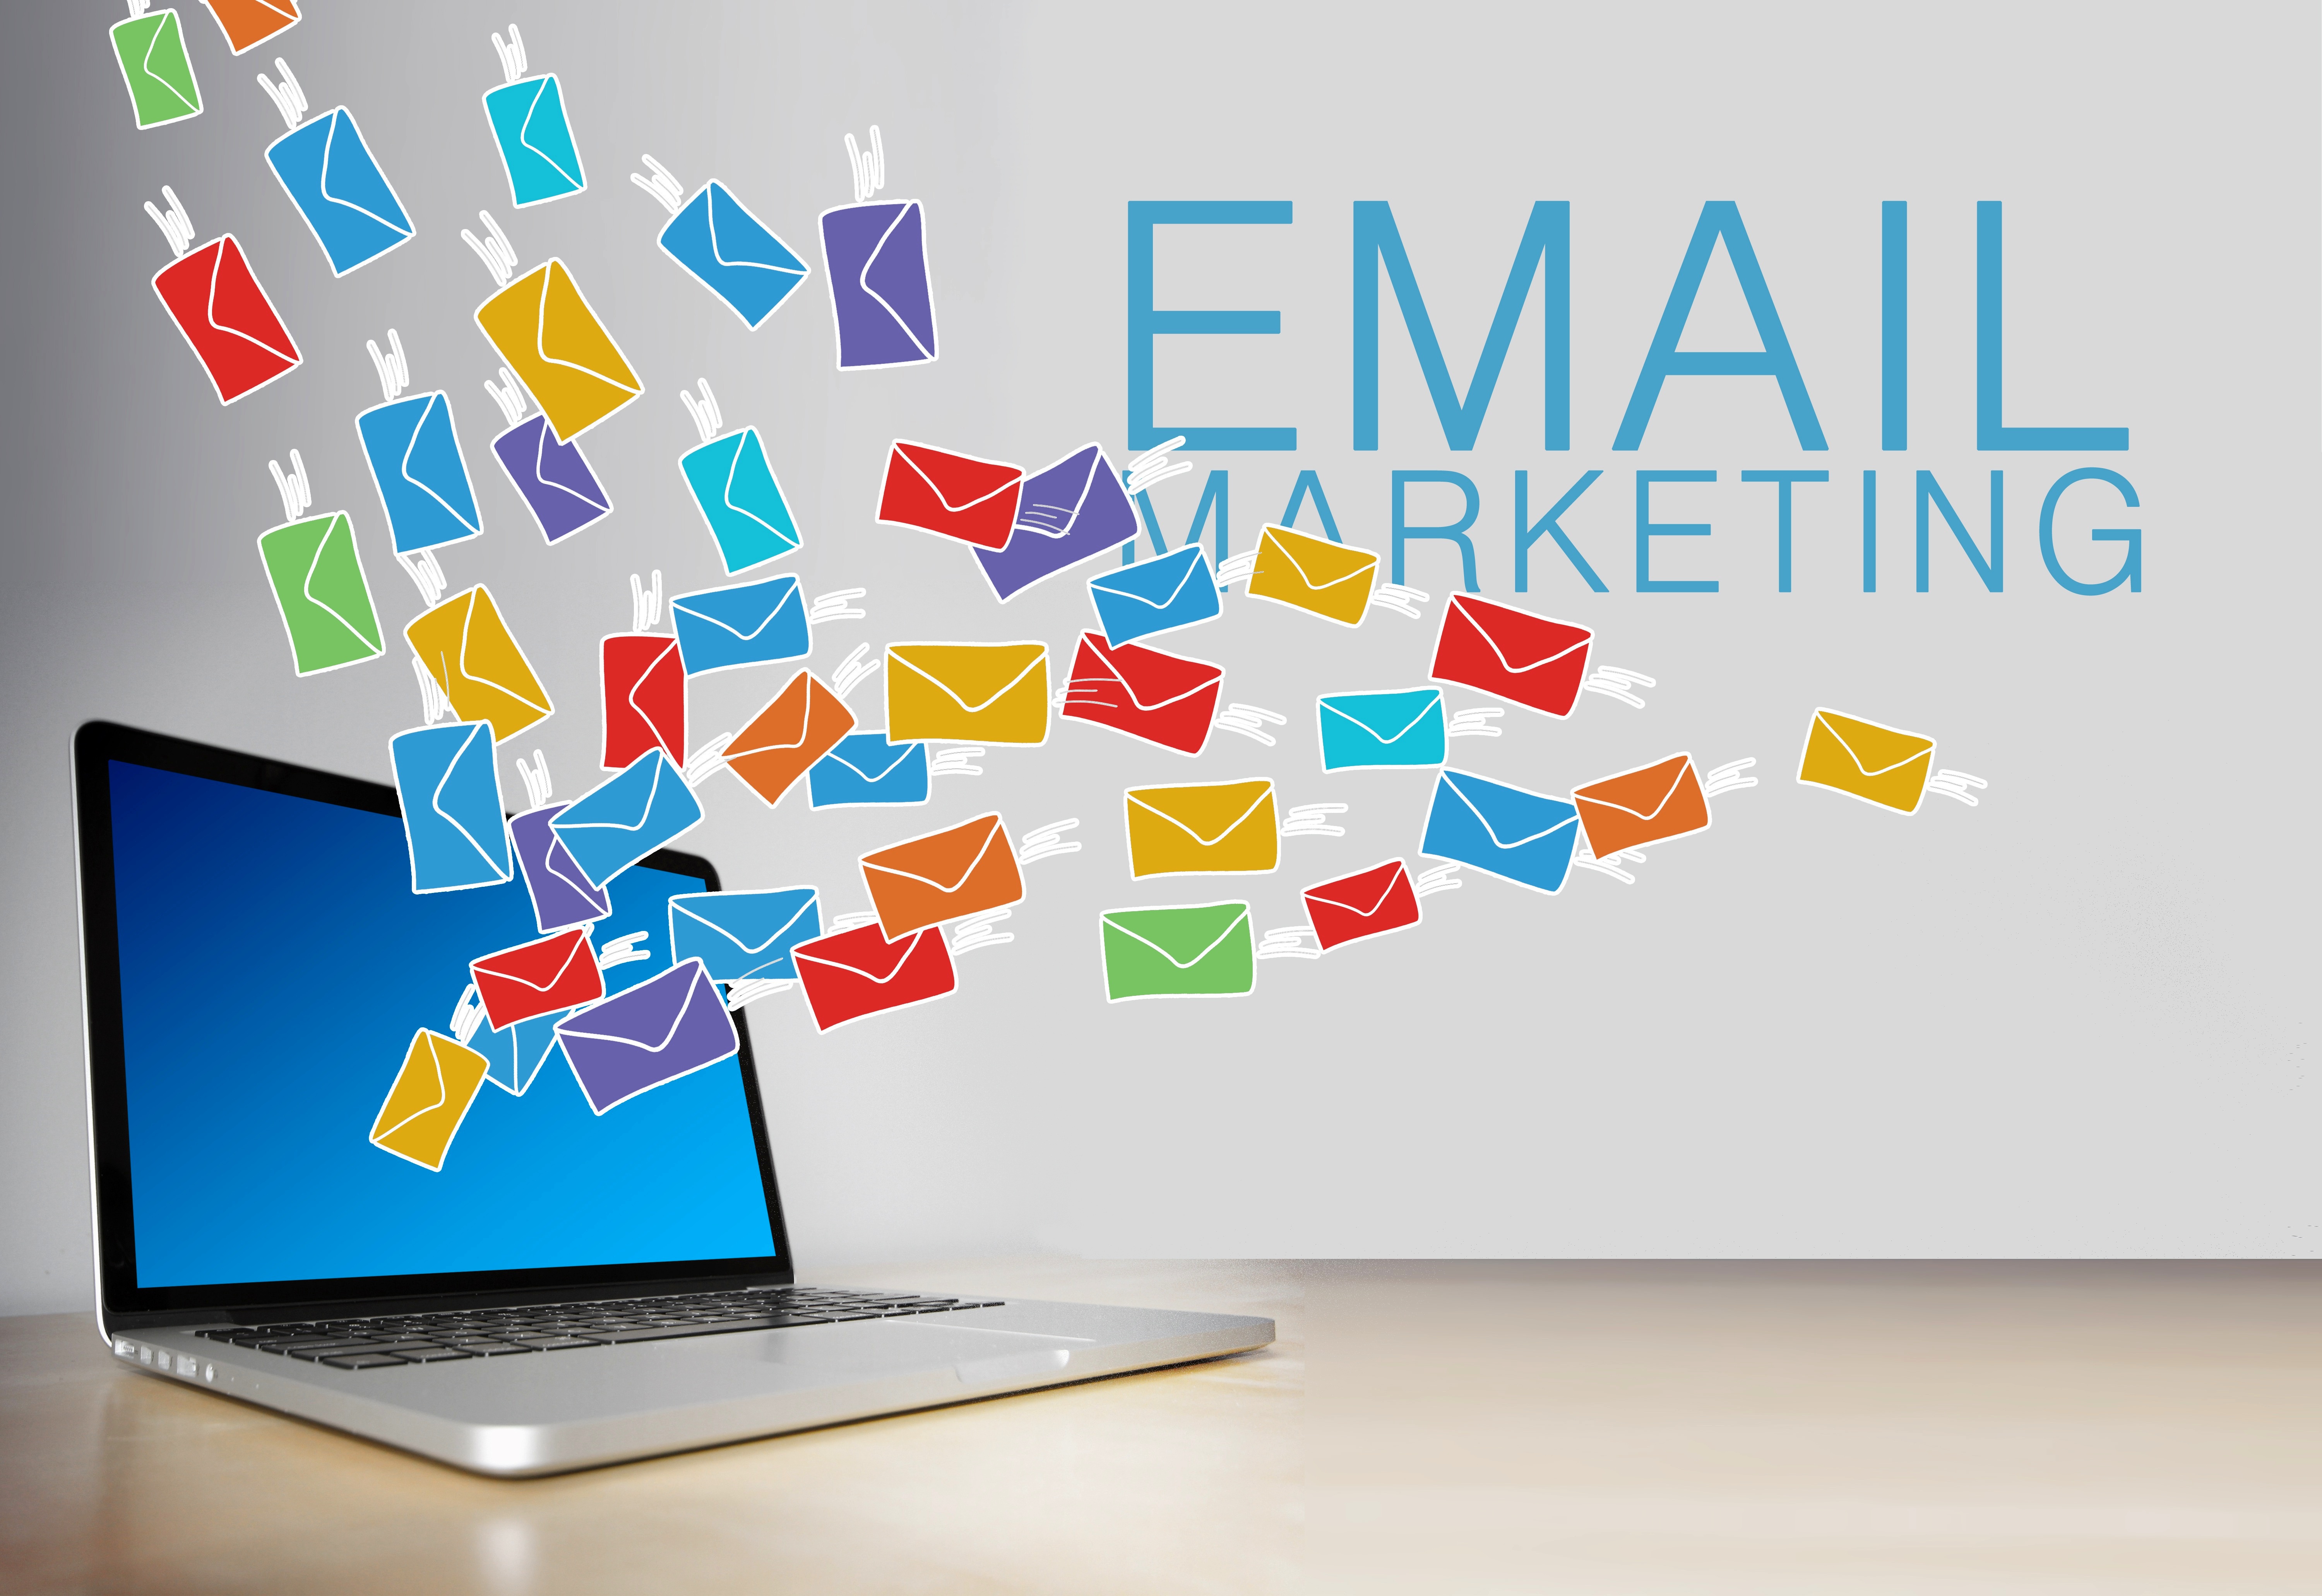 Email marketing: Developing and sending newsletters and promotional emails to keep in touch with customers and increase sales